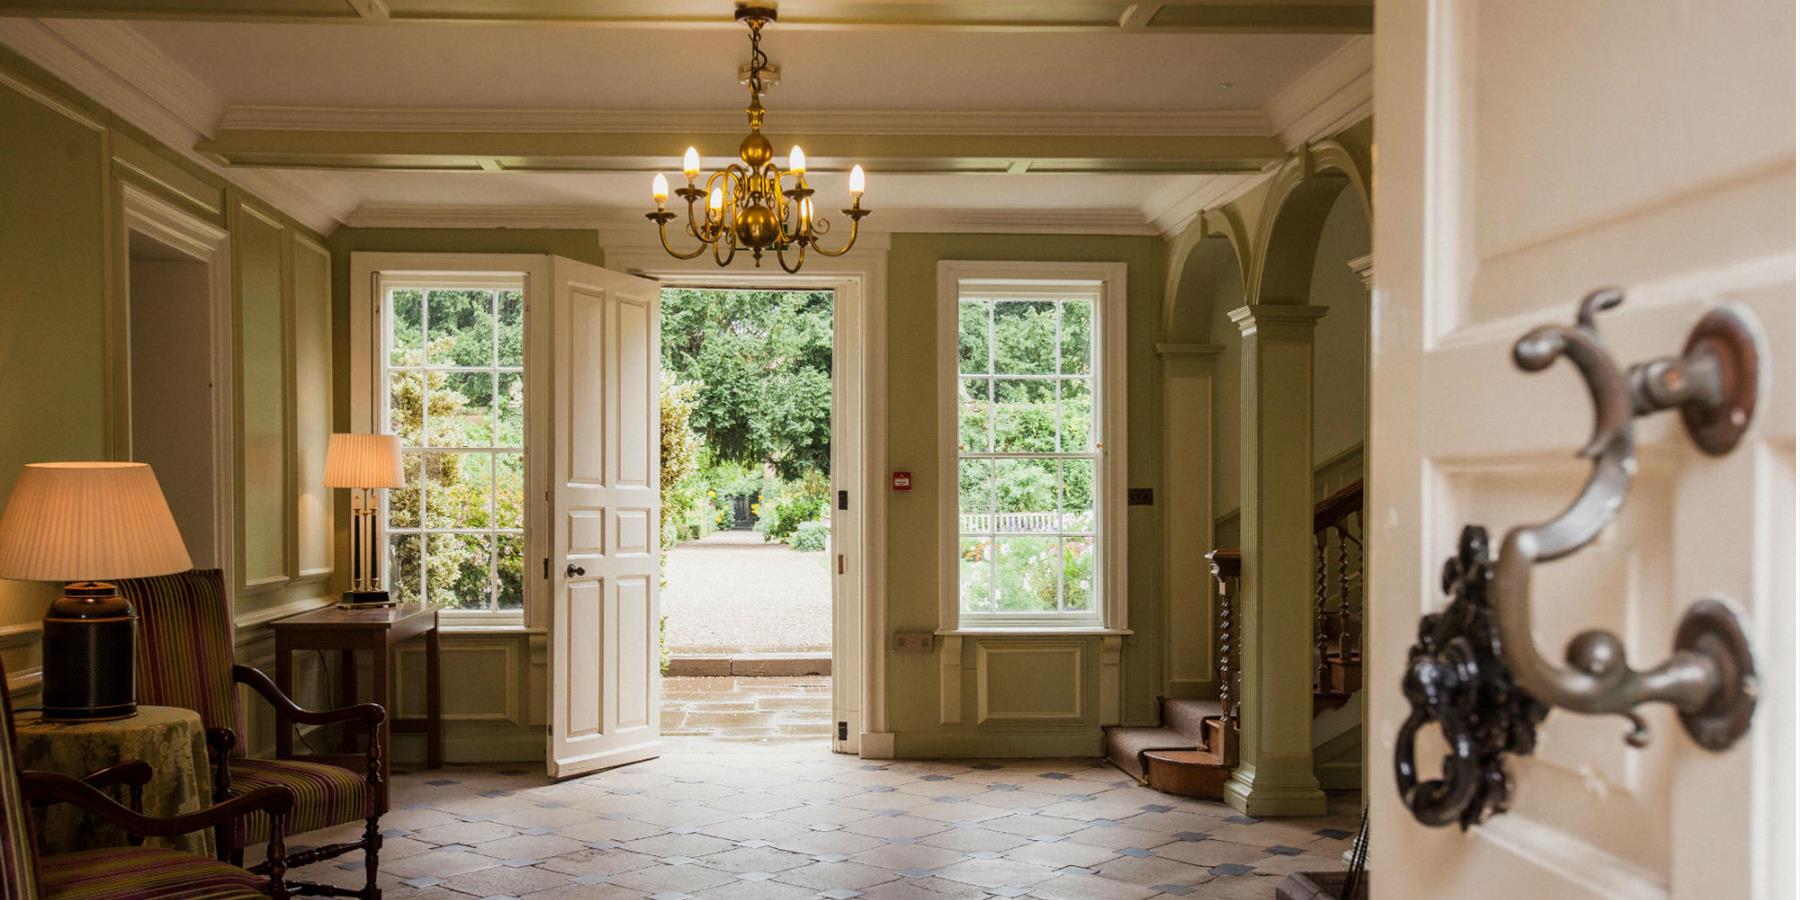 Belgrave Hall Guided Tours